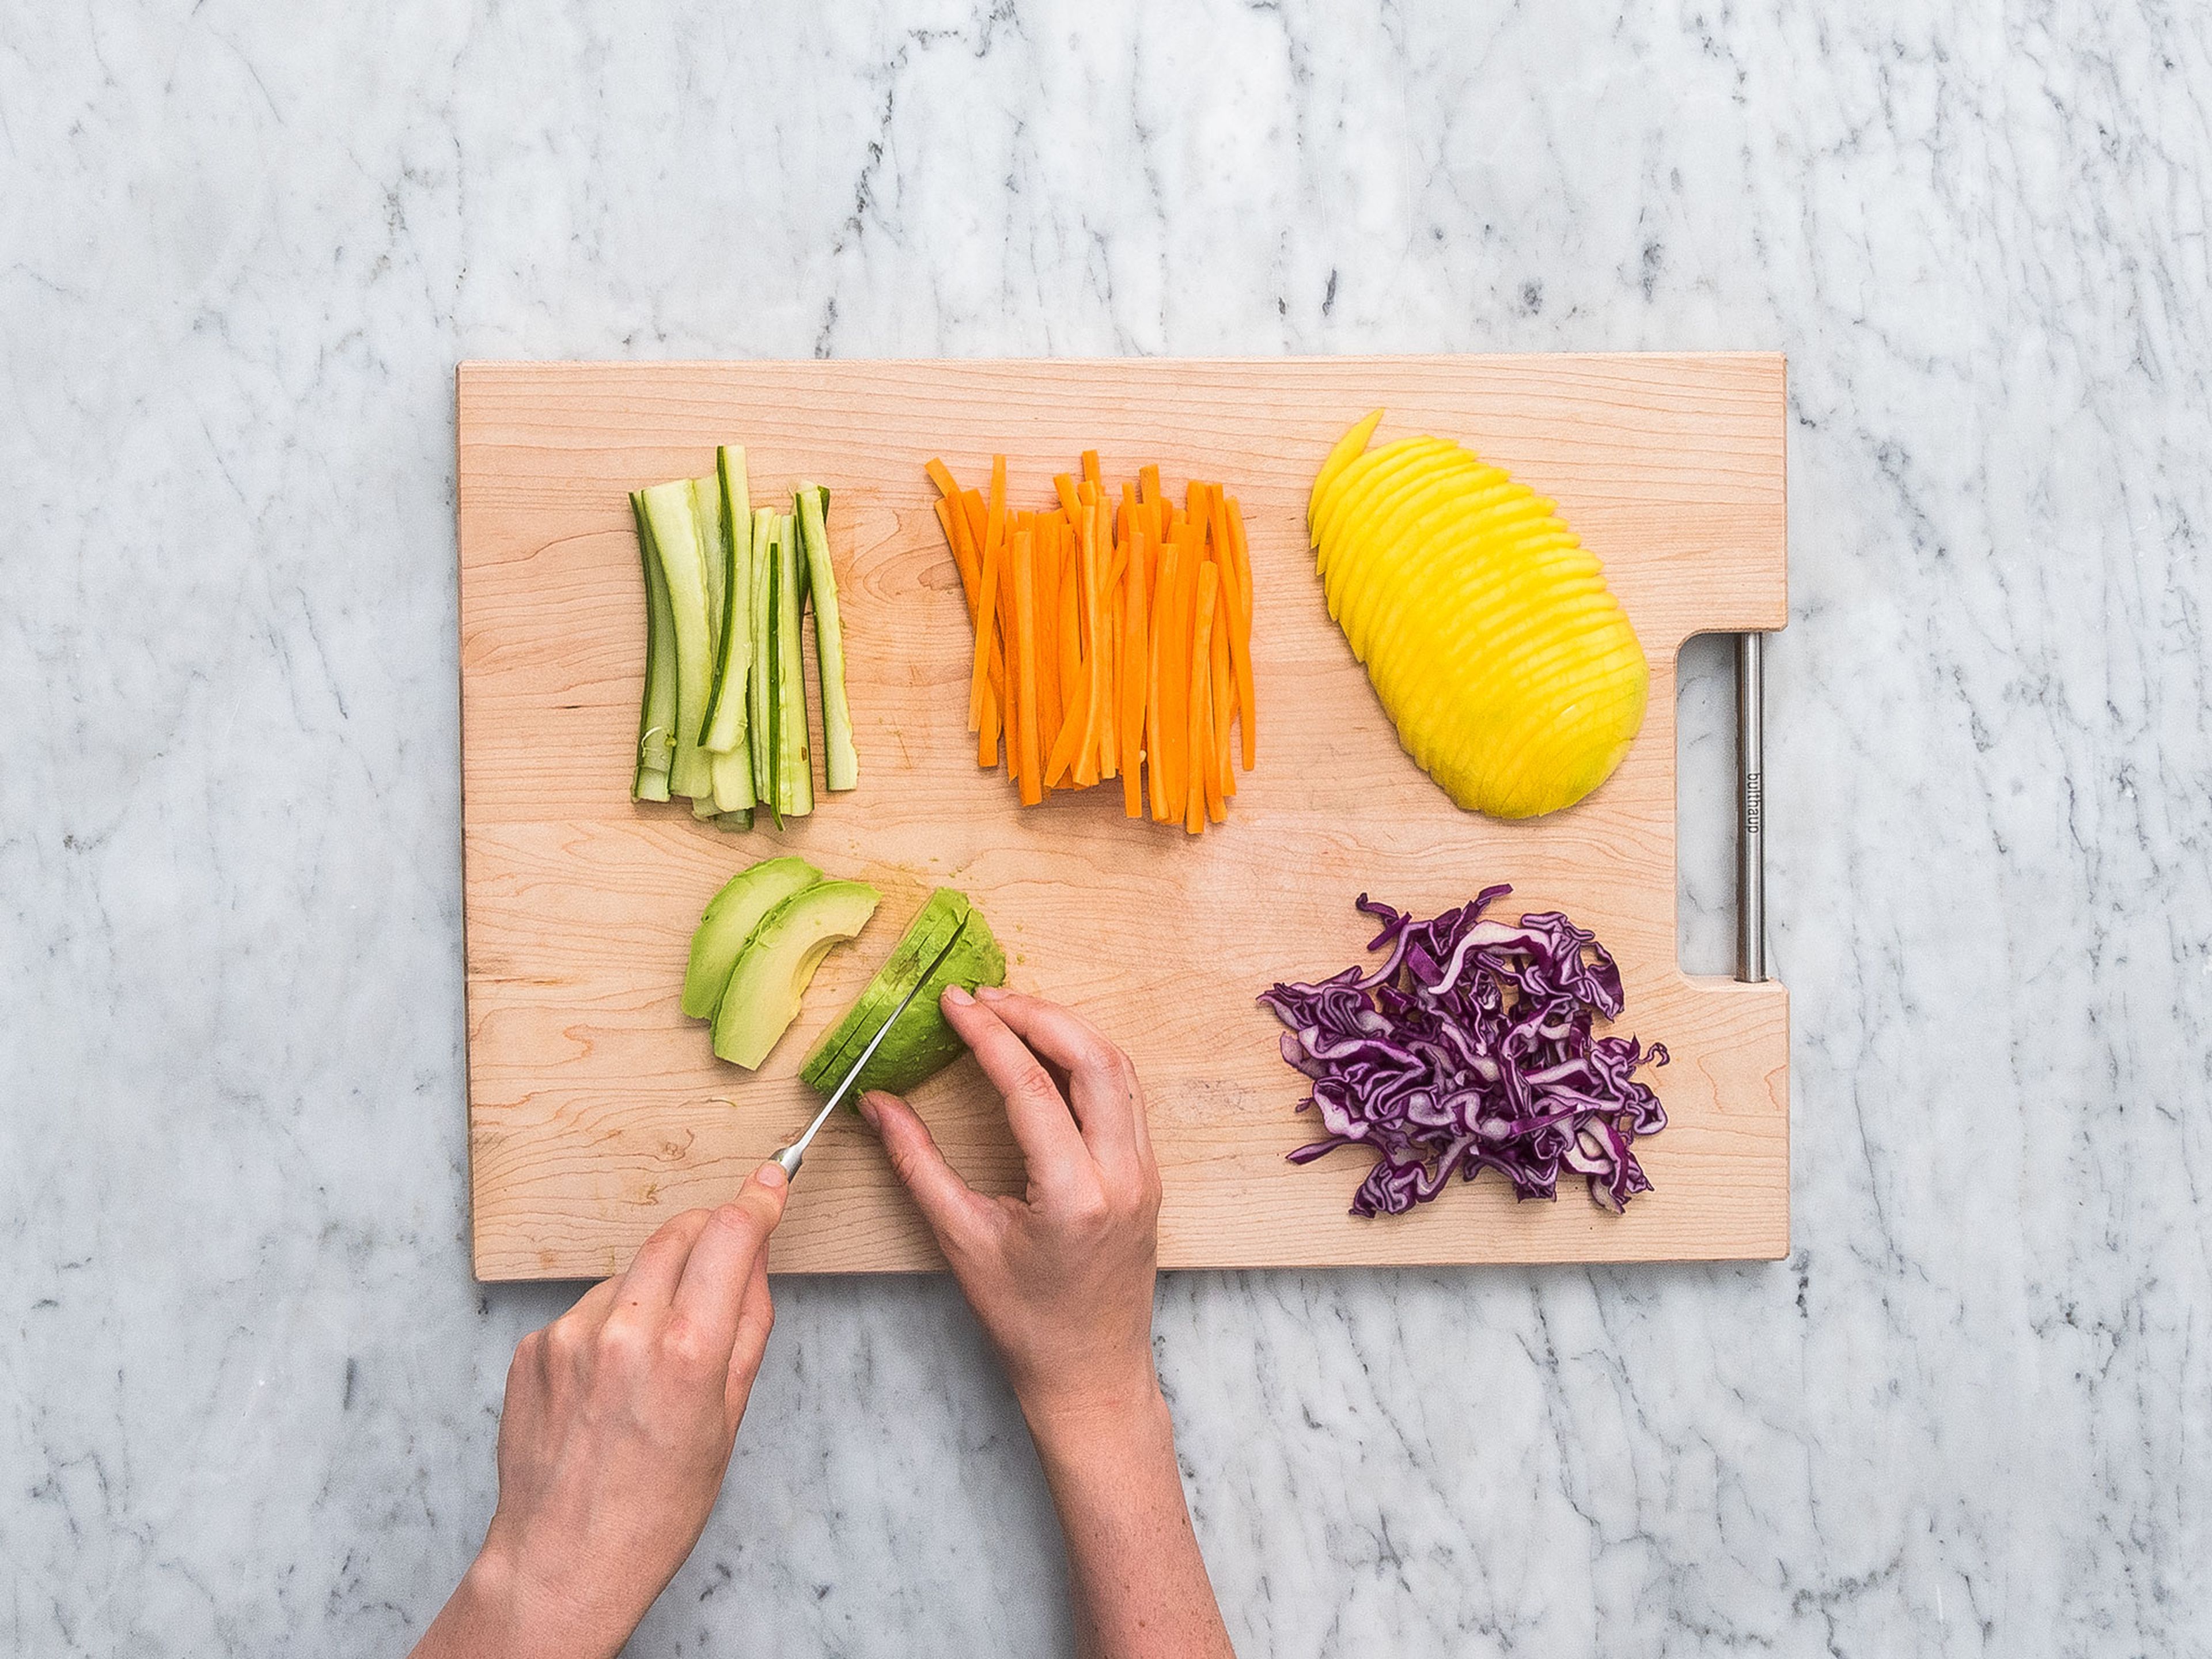 Peel and slice the carrots, and chop the cucumber and red cabbage into fine matchsticks. Finely slice mango, radish and avocado. Cut the cress.